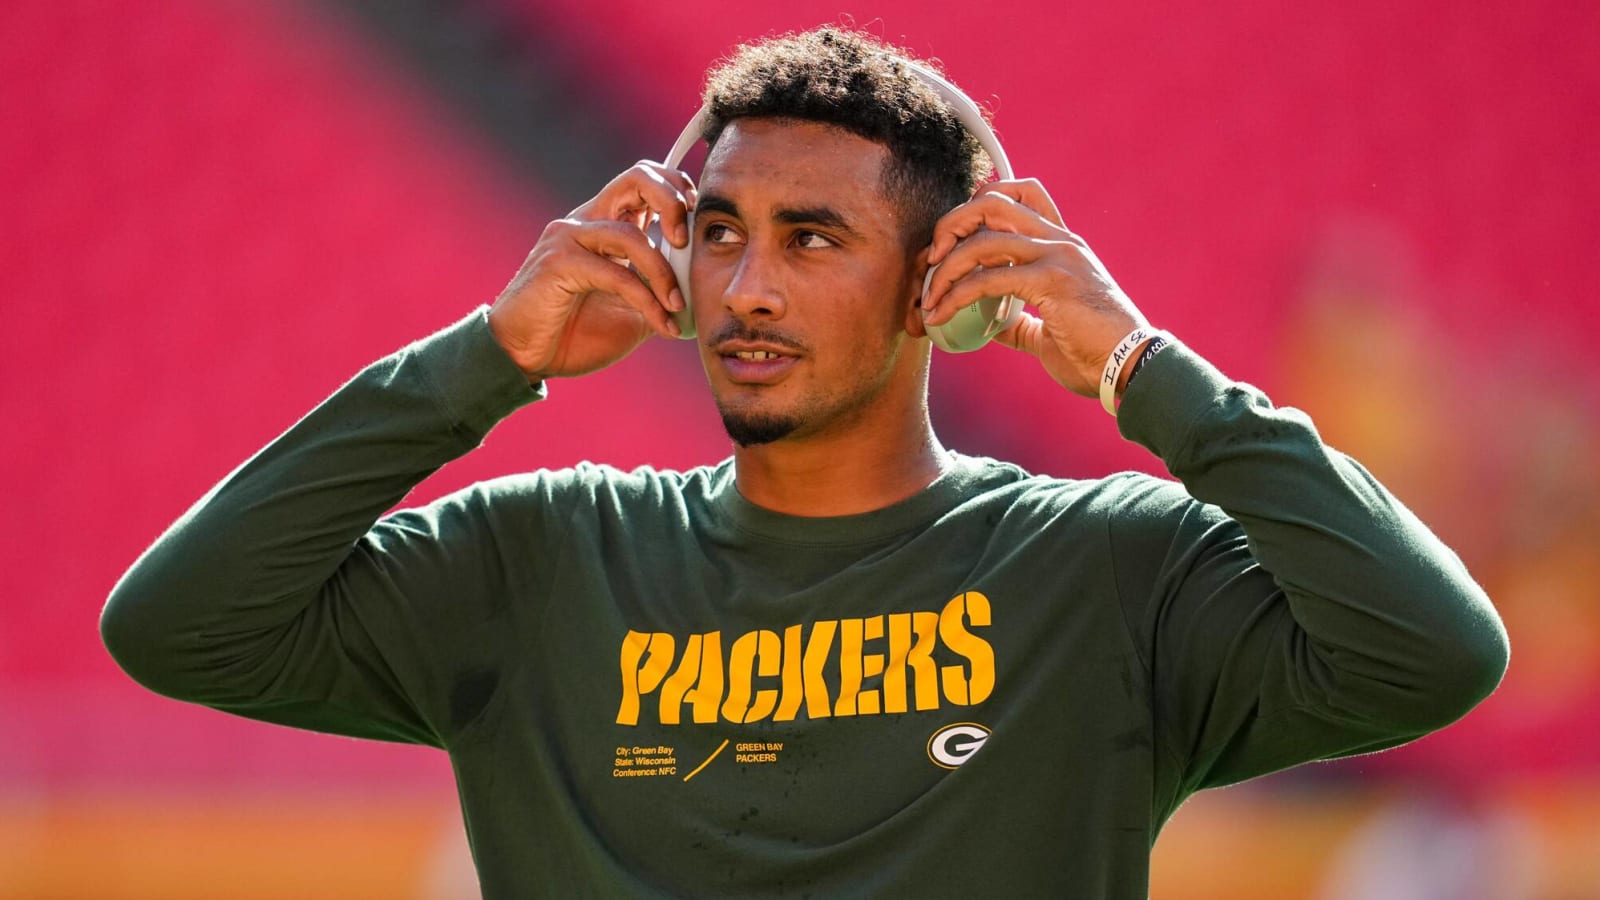 Jordan Love’s contract gives Packers ‘protection’ for future